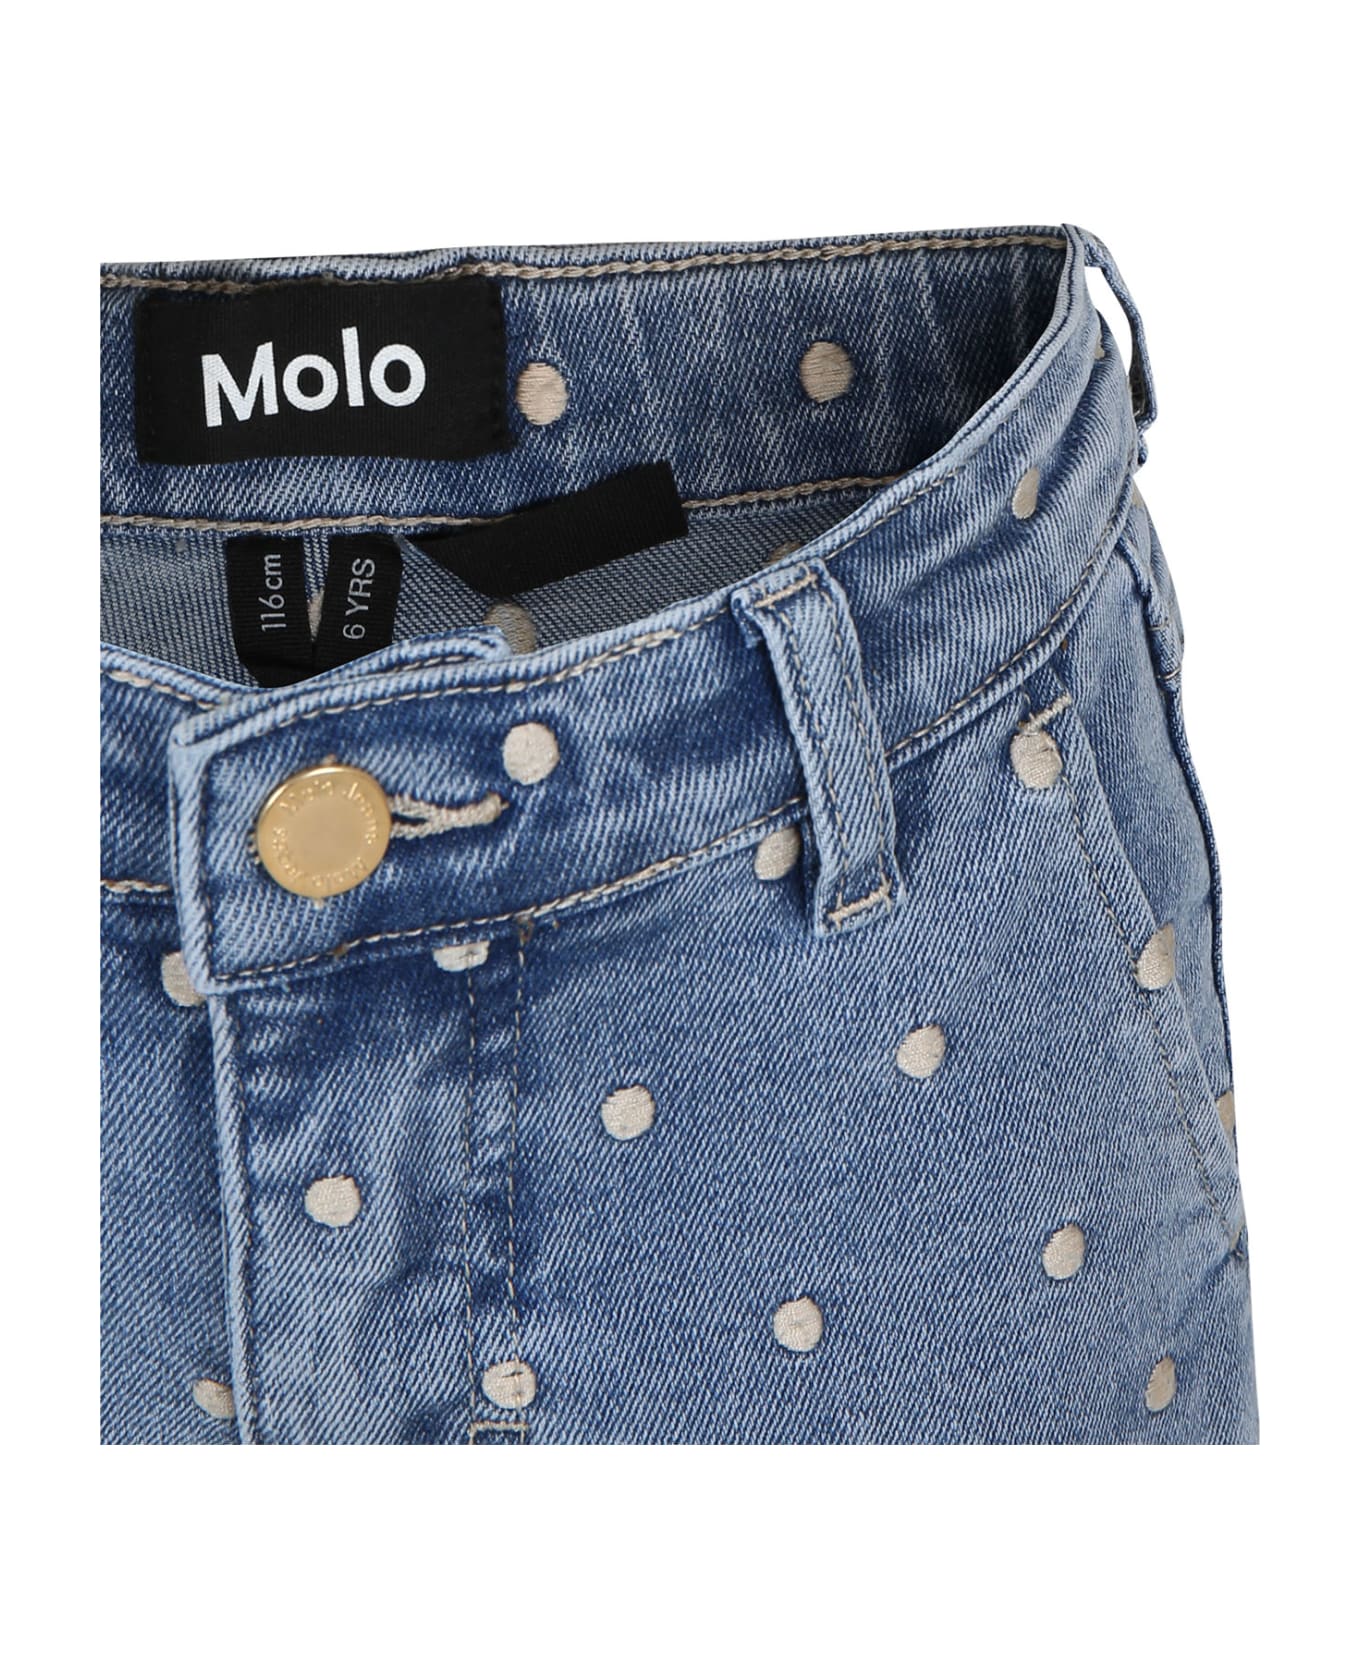 Molo Blue Shorts For Girl With Polka Dots - Denim